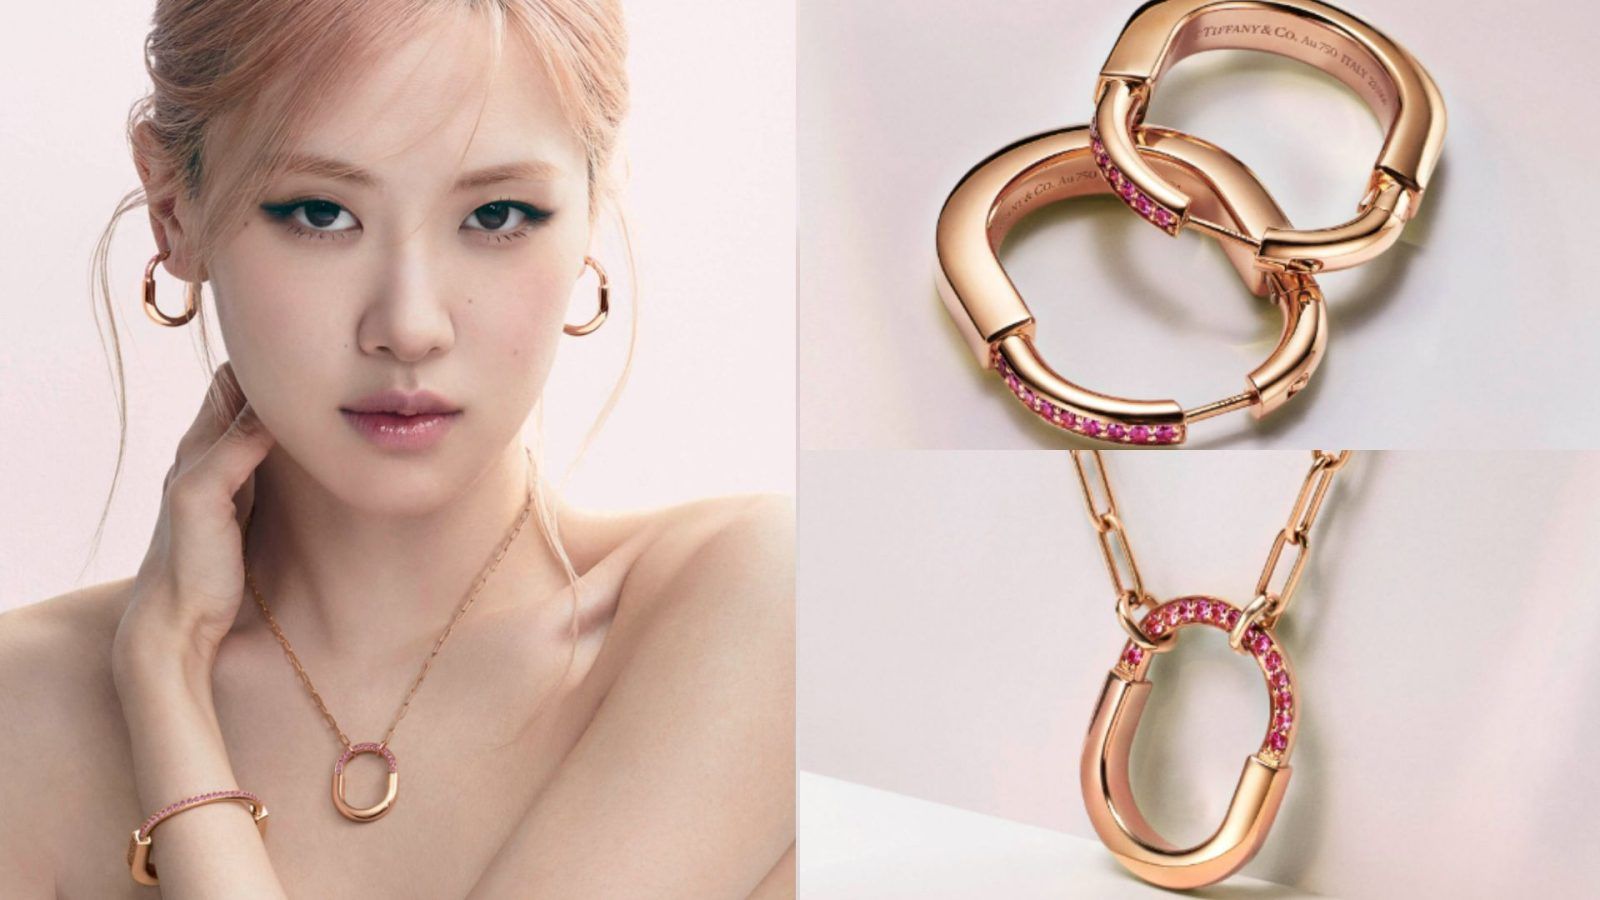 BLACKPINK's Rosé inspires a new Tiffany & Co. capsule collection